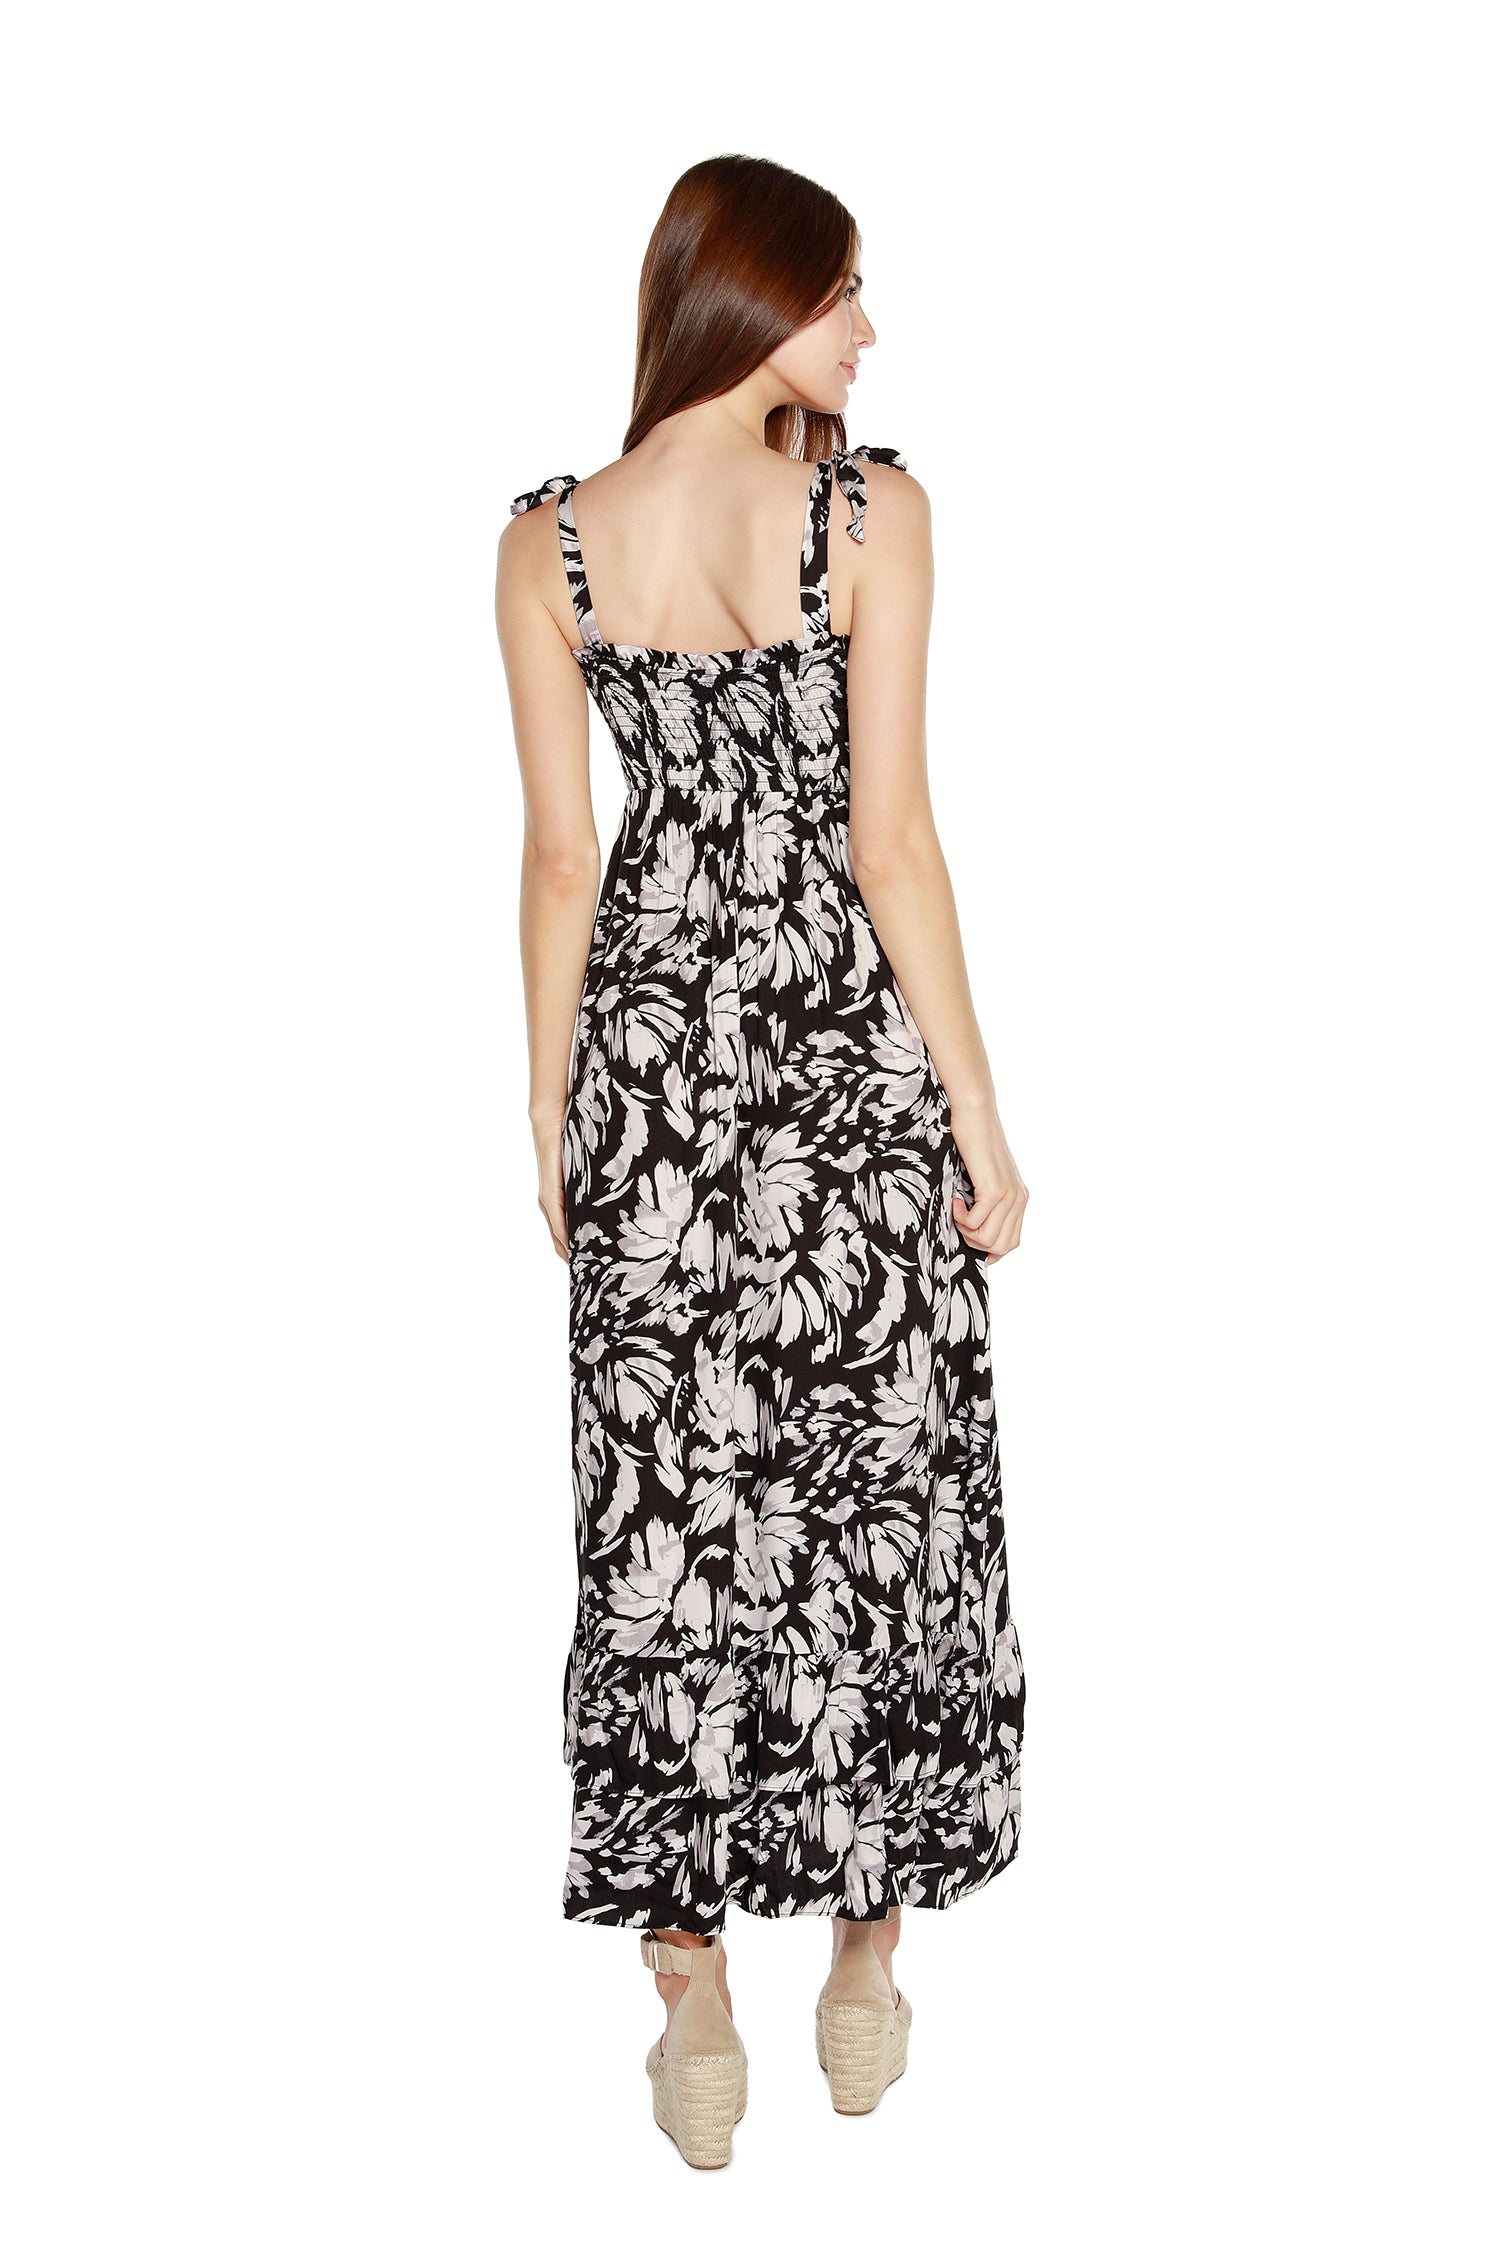 Women’s Floral Maxi Dress with Tie Straps and Hem Ruffles